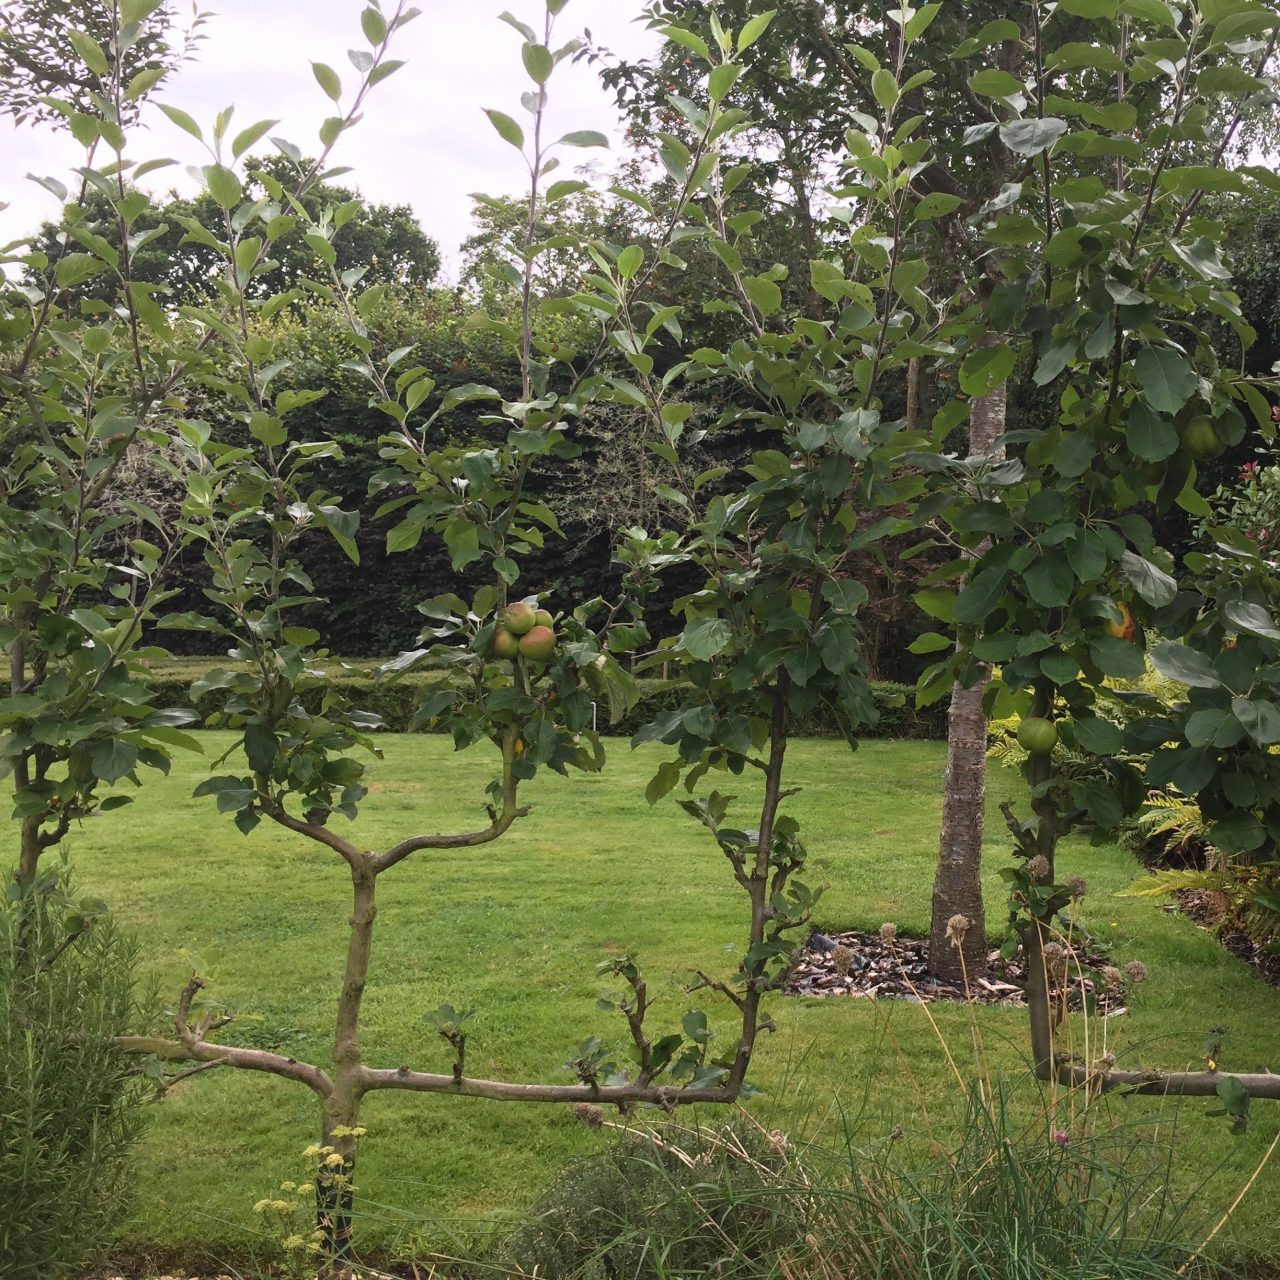 These are candelabra style apple trees in my own garden here in Berkshire. They are part of the herb bed